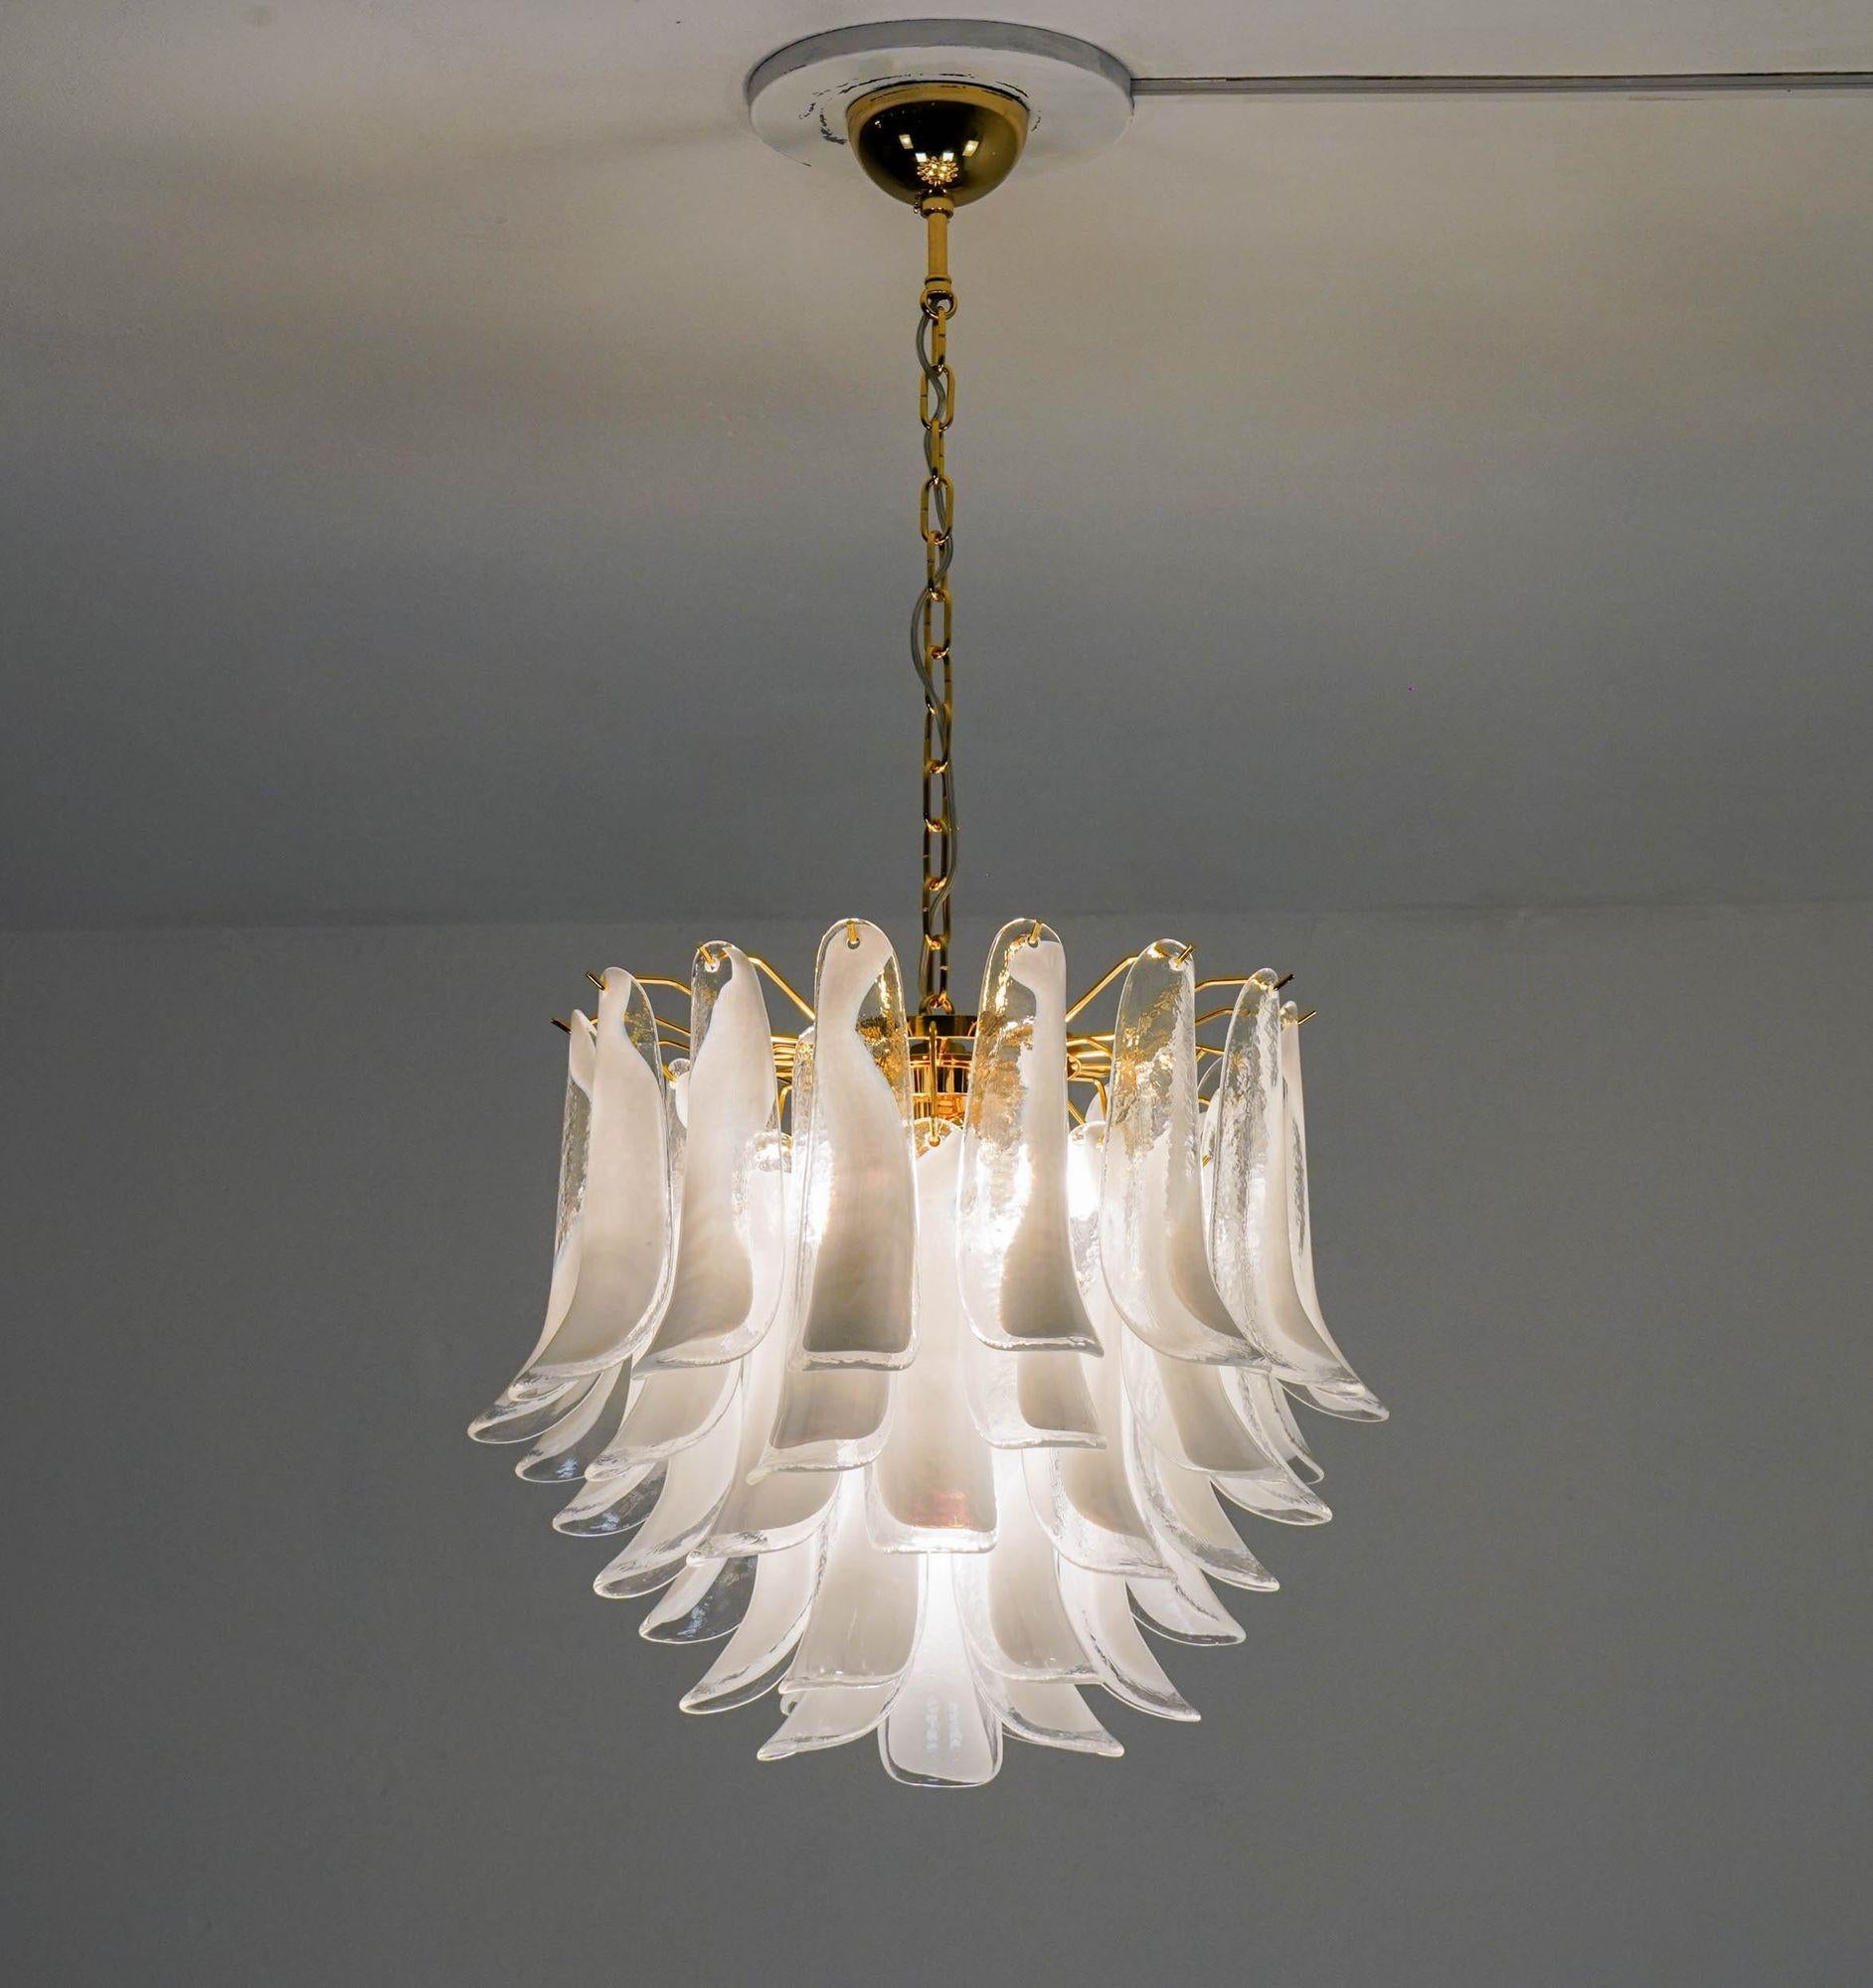 Drawing on decades of experience in lighting, my aim was to fashion a chandelier that seamlessly marries timeless elegance with practicality.

This listing is for the US wired UL components not listed. For buyers who don't need the UL and are